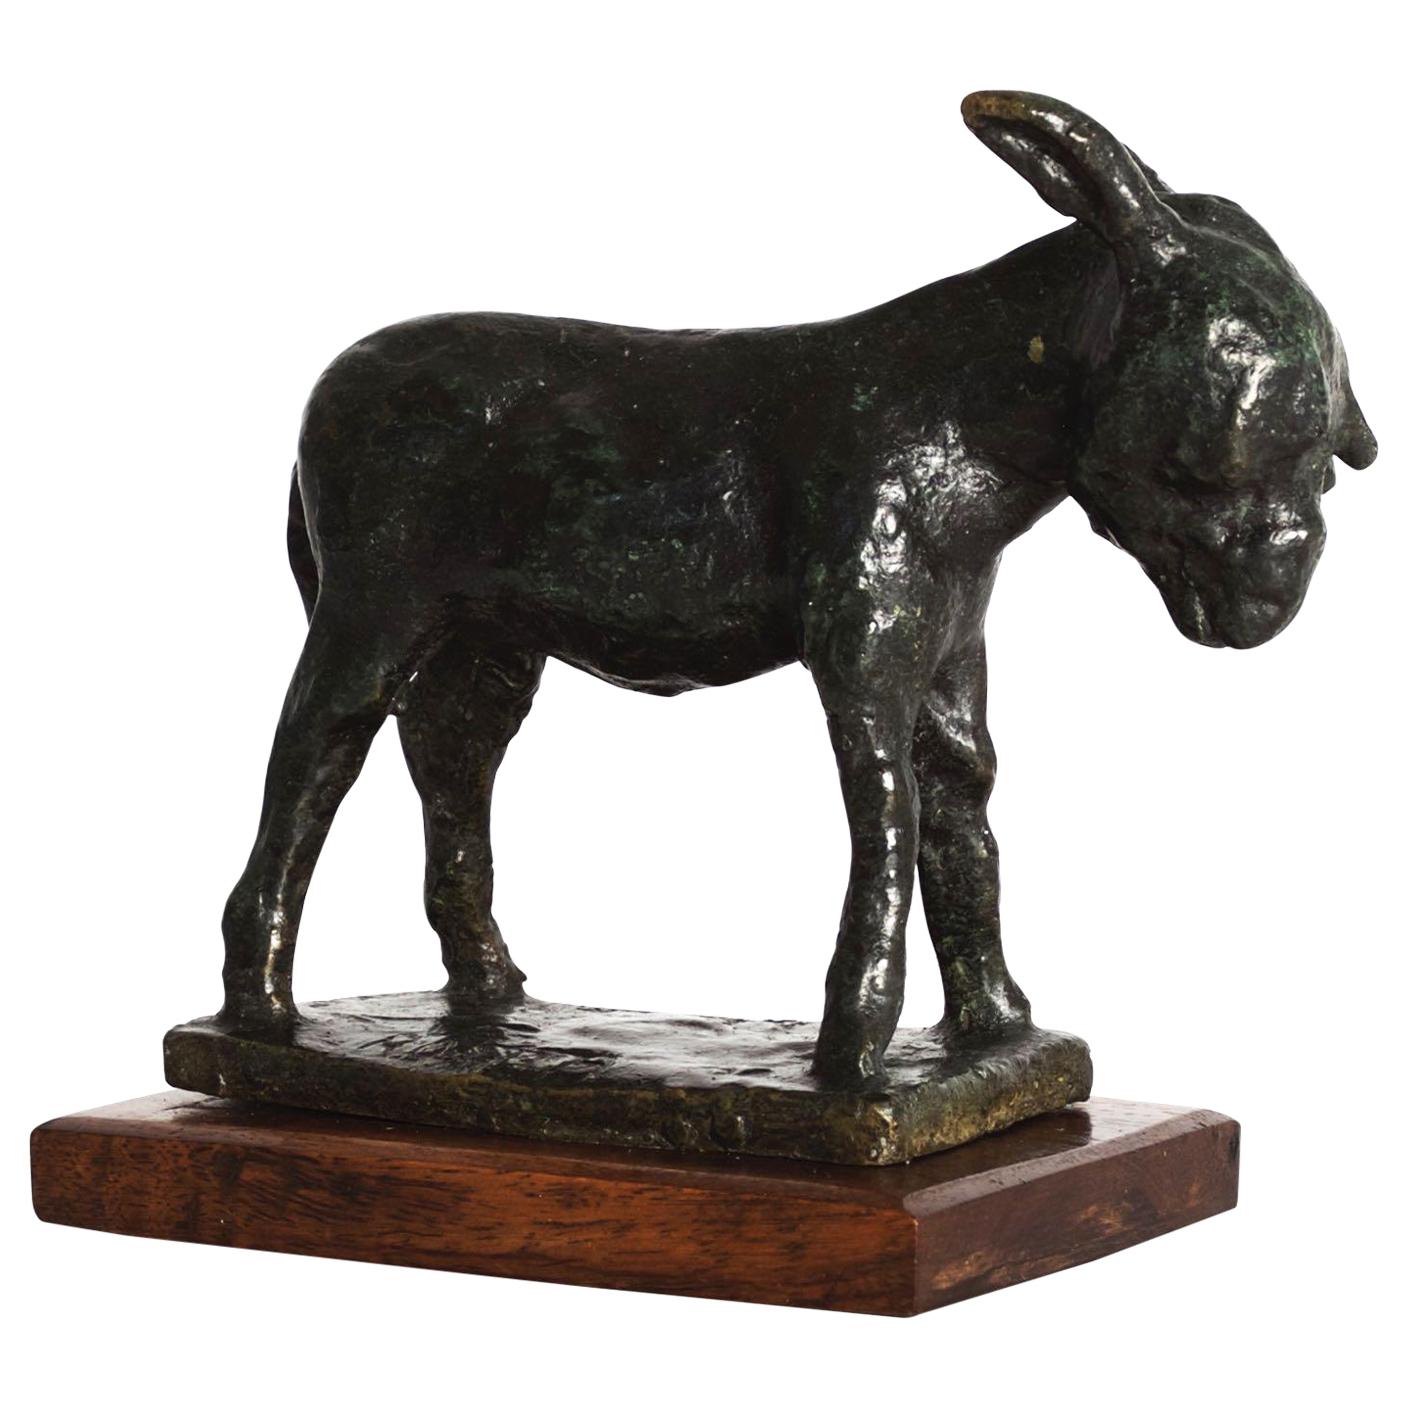 "Rosita" Midcentury Bronze Sculpture of Donkey Foal by Carl Lewis Pappe